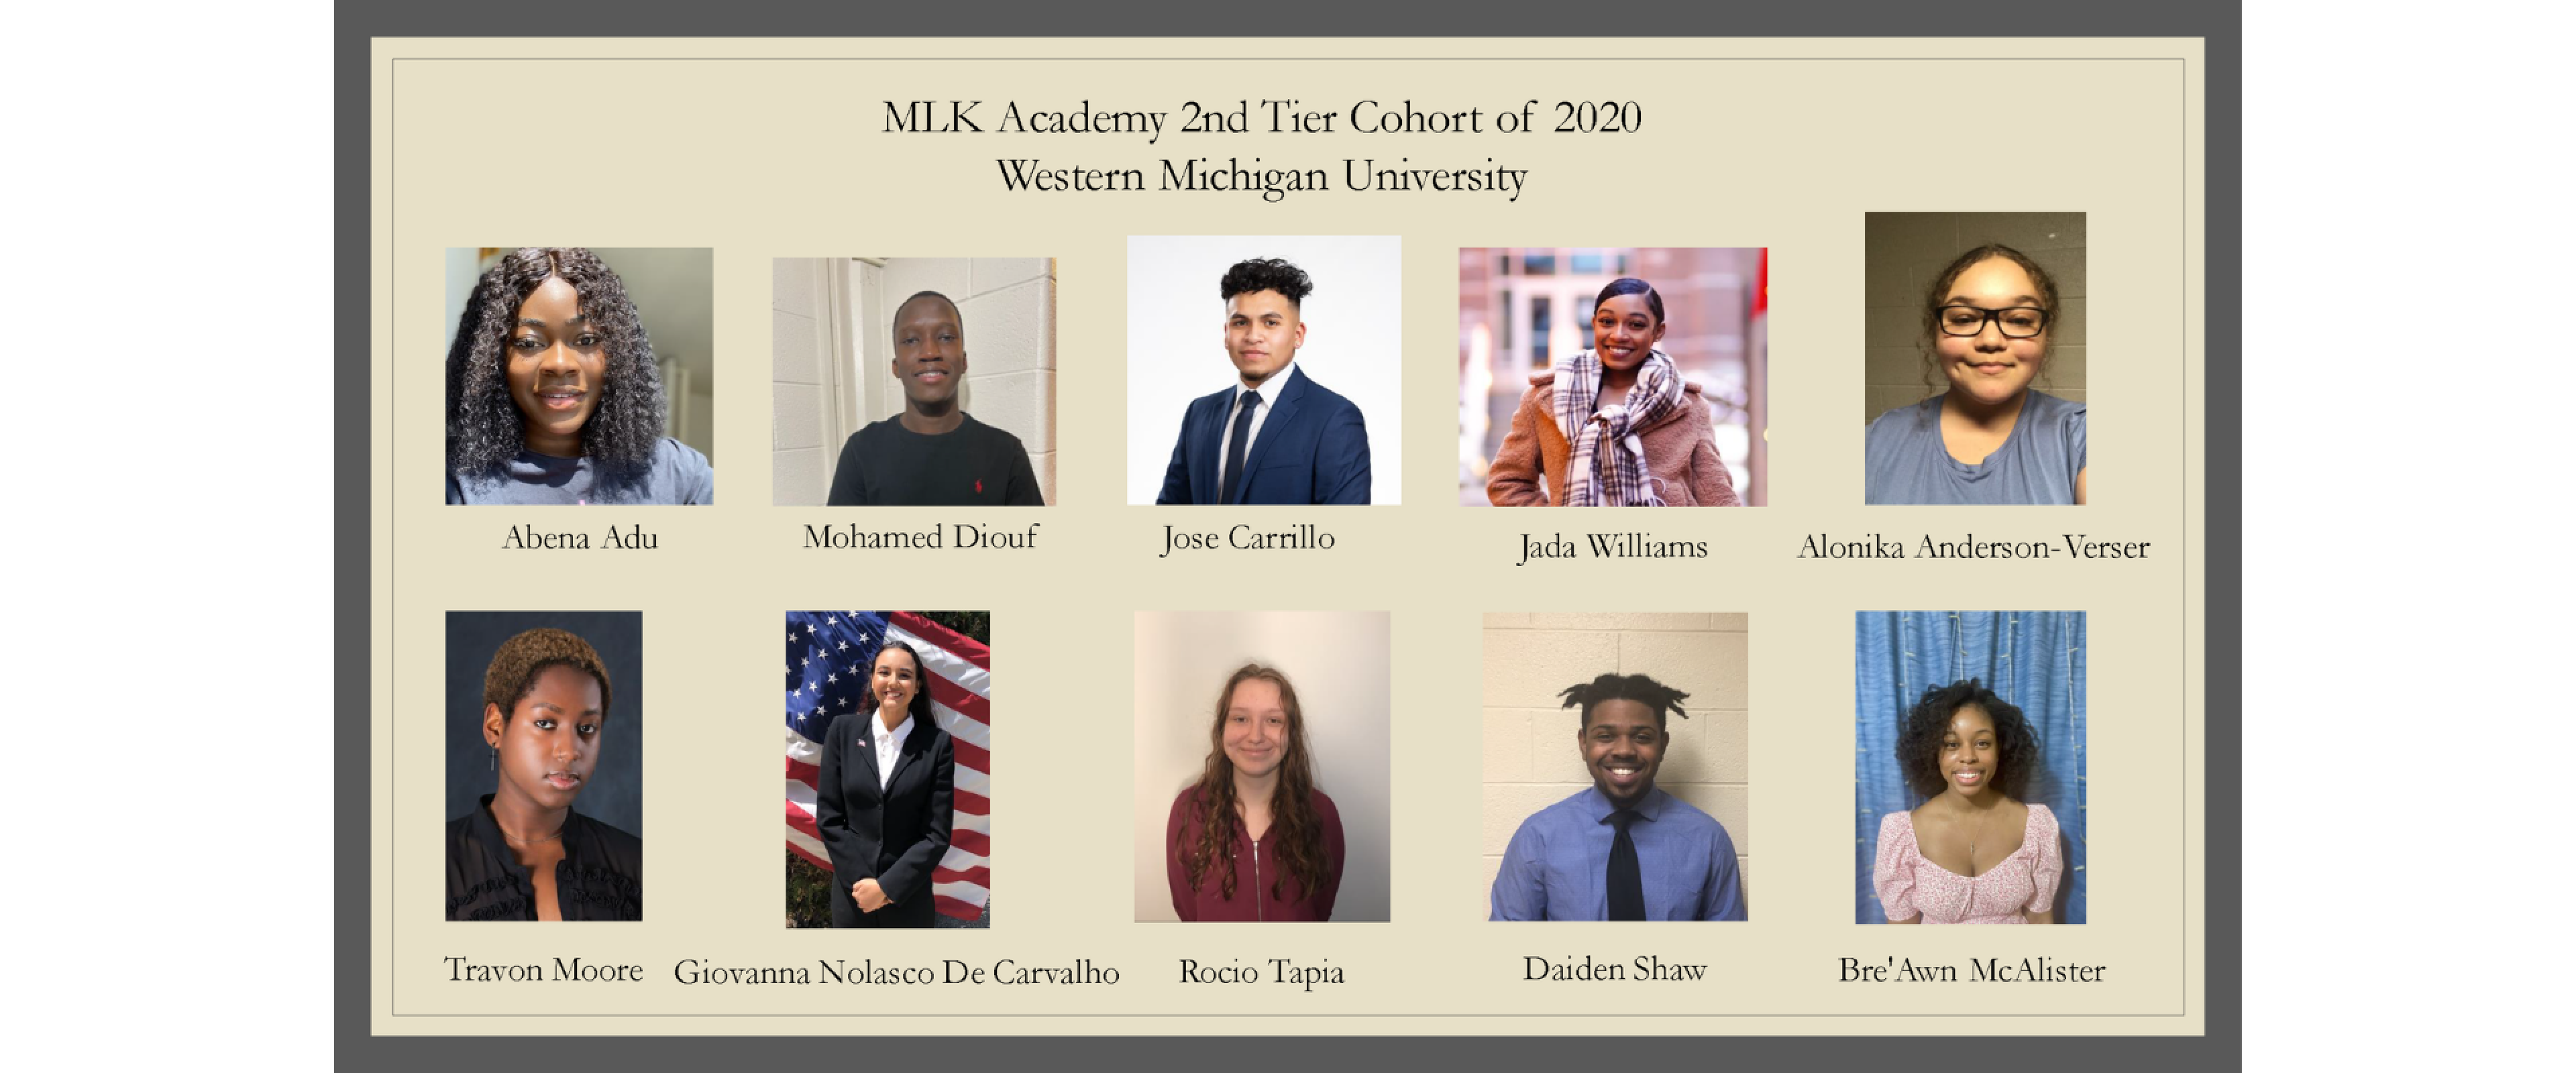 A collage of 10 students who are second tier MLK scholars in the 2020 cohort.